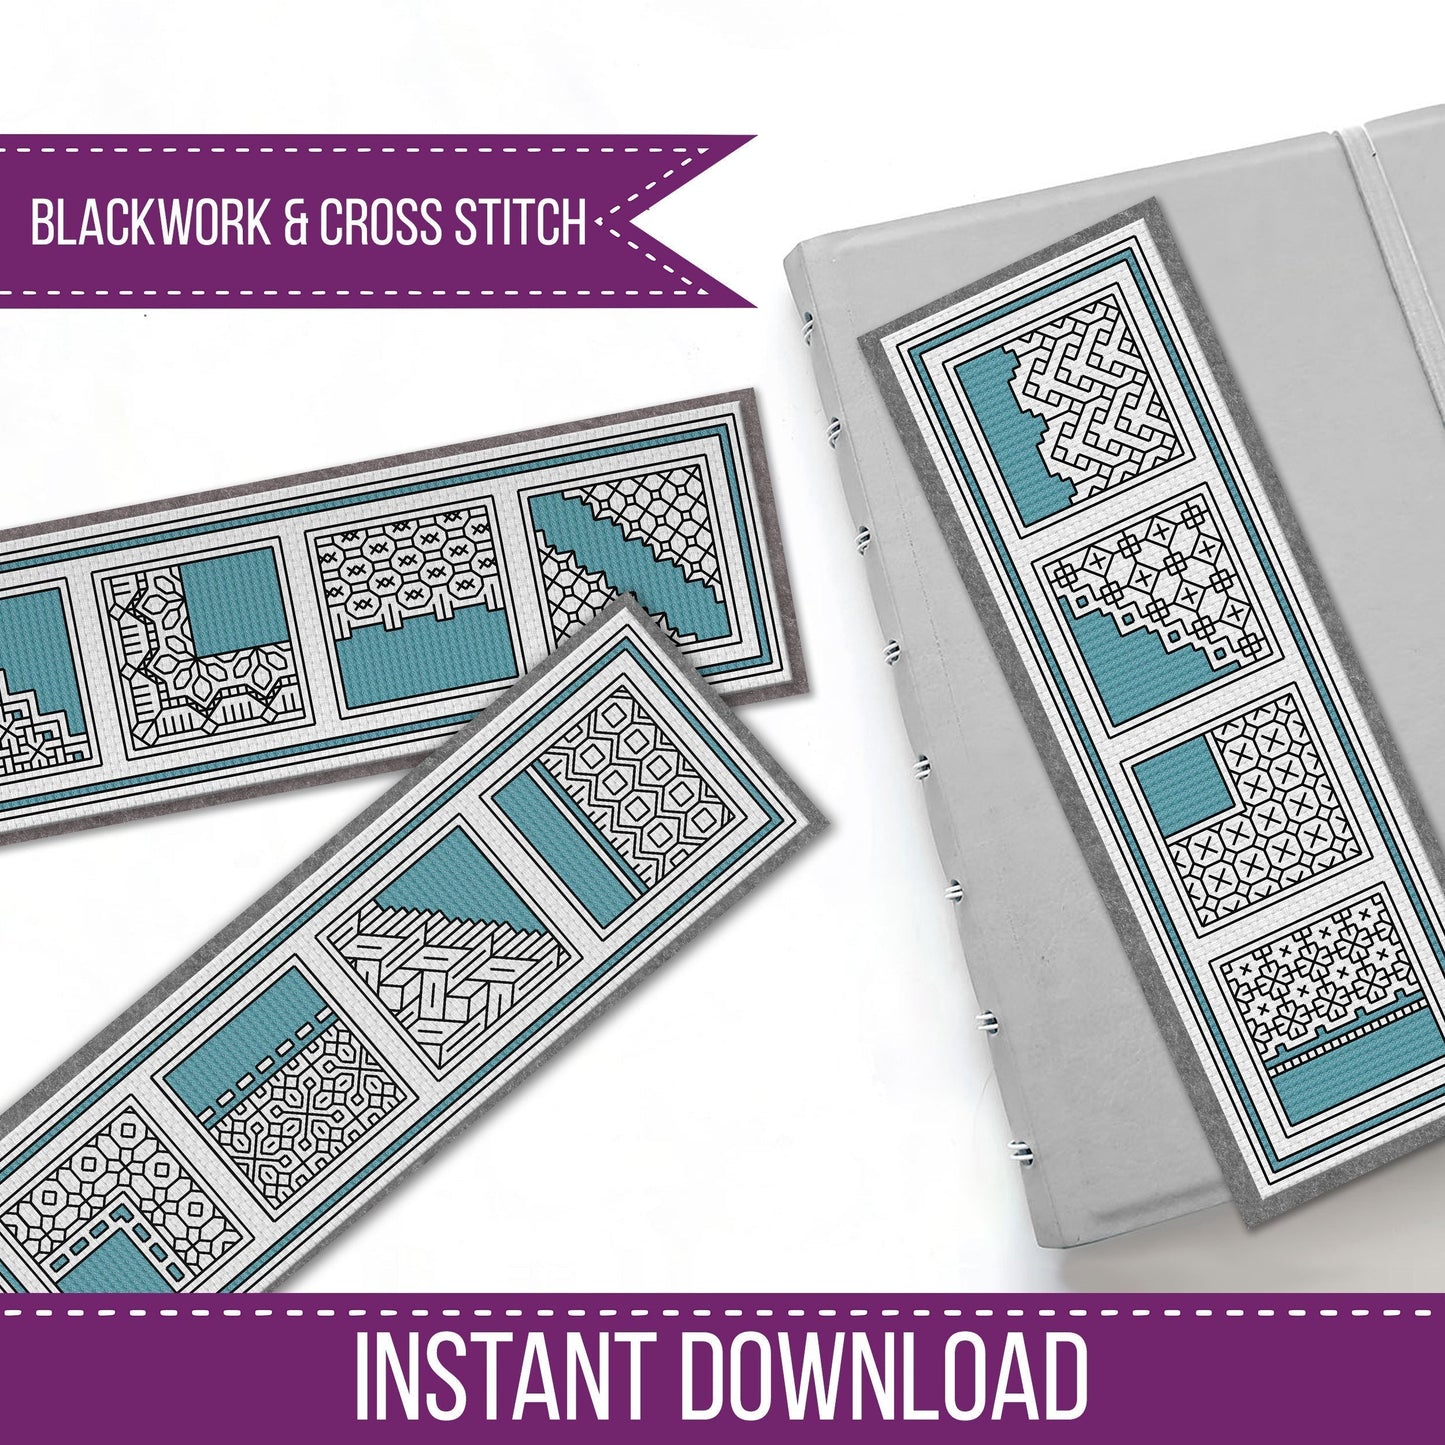 Turquoise Bookmarks - Blackwork Patterns & Cross Stitch by Peppermint Purple